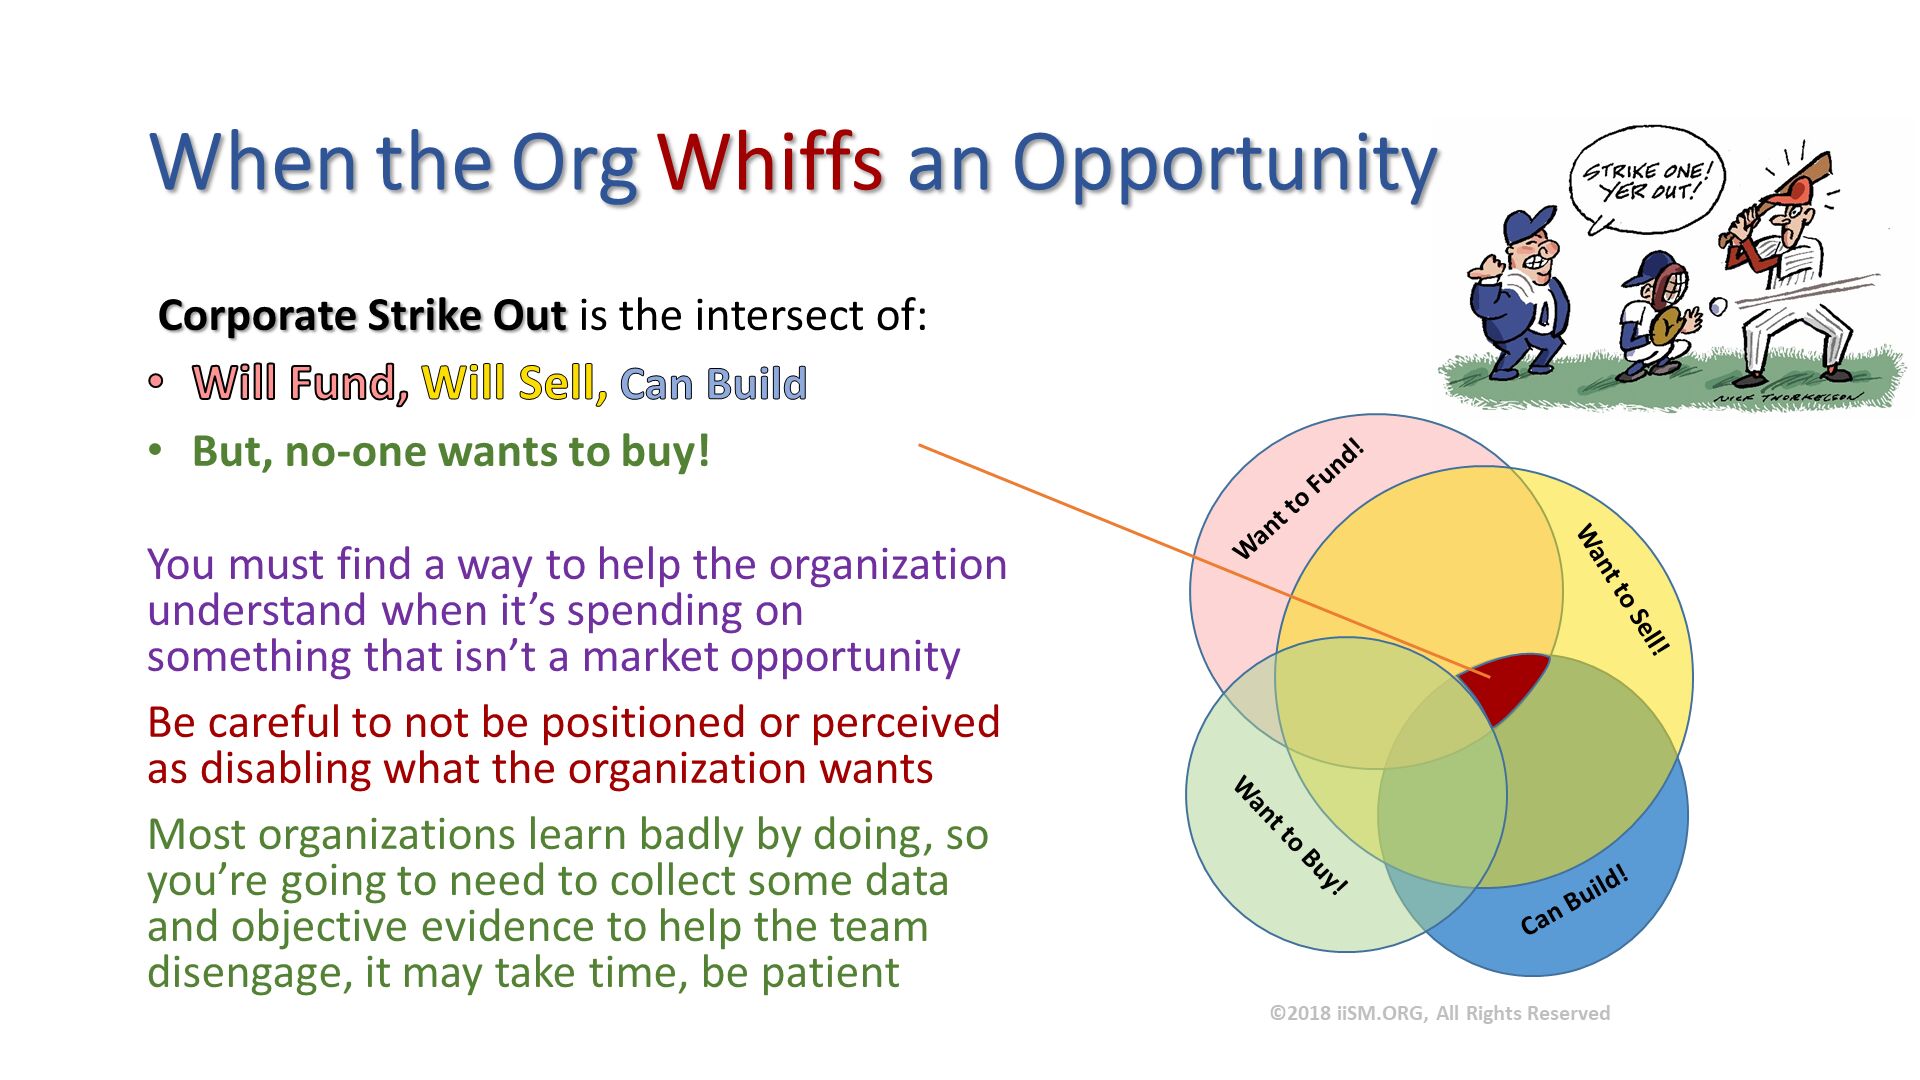 When the Org Whiffs an Opportunity.  Corporate Strike Out is the intersect of:
Will Fund, Will Sell, Can Build
But, no-one wants to buy!

You must find a way to help the organization understand when it’s spending on something that isn’t a market opportunity
Be careful to not be positioned or perceived as disabling what the organization wants
Most organizations learn badly by doing, so you’re going to need to collect some data and objective evidence to help the team disengage, it may take time, be patient

. 